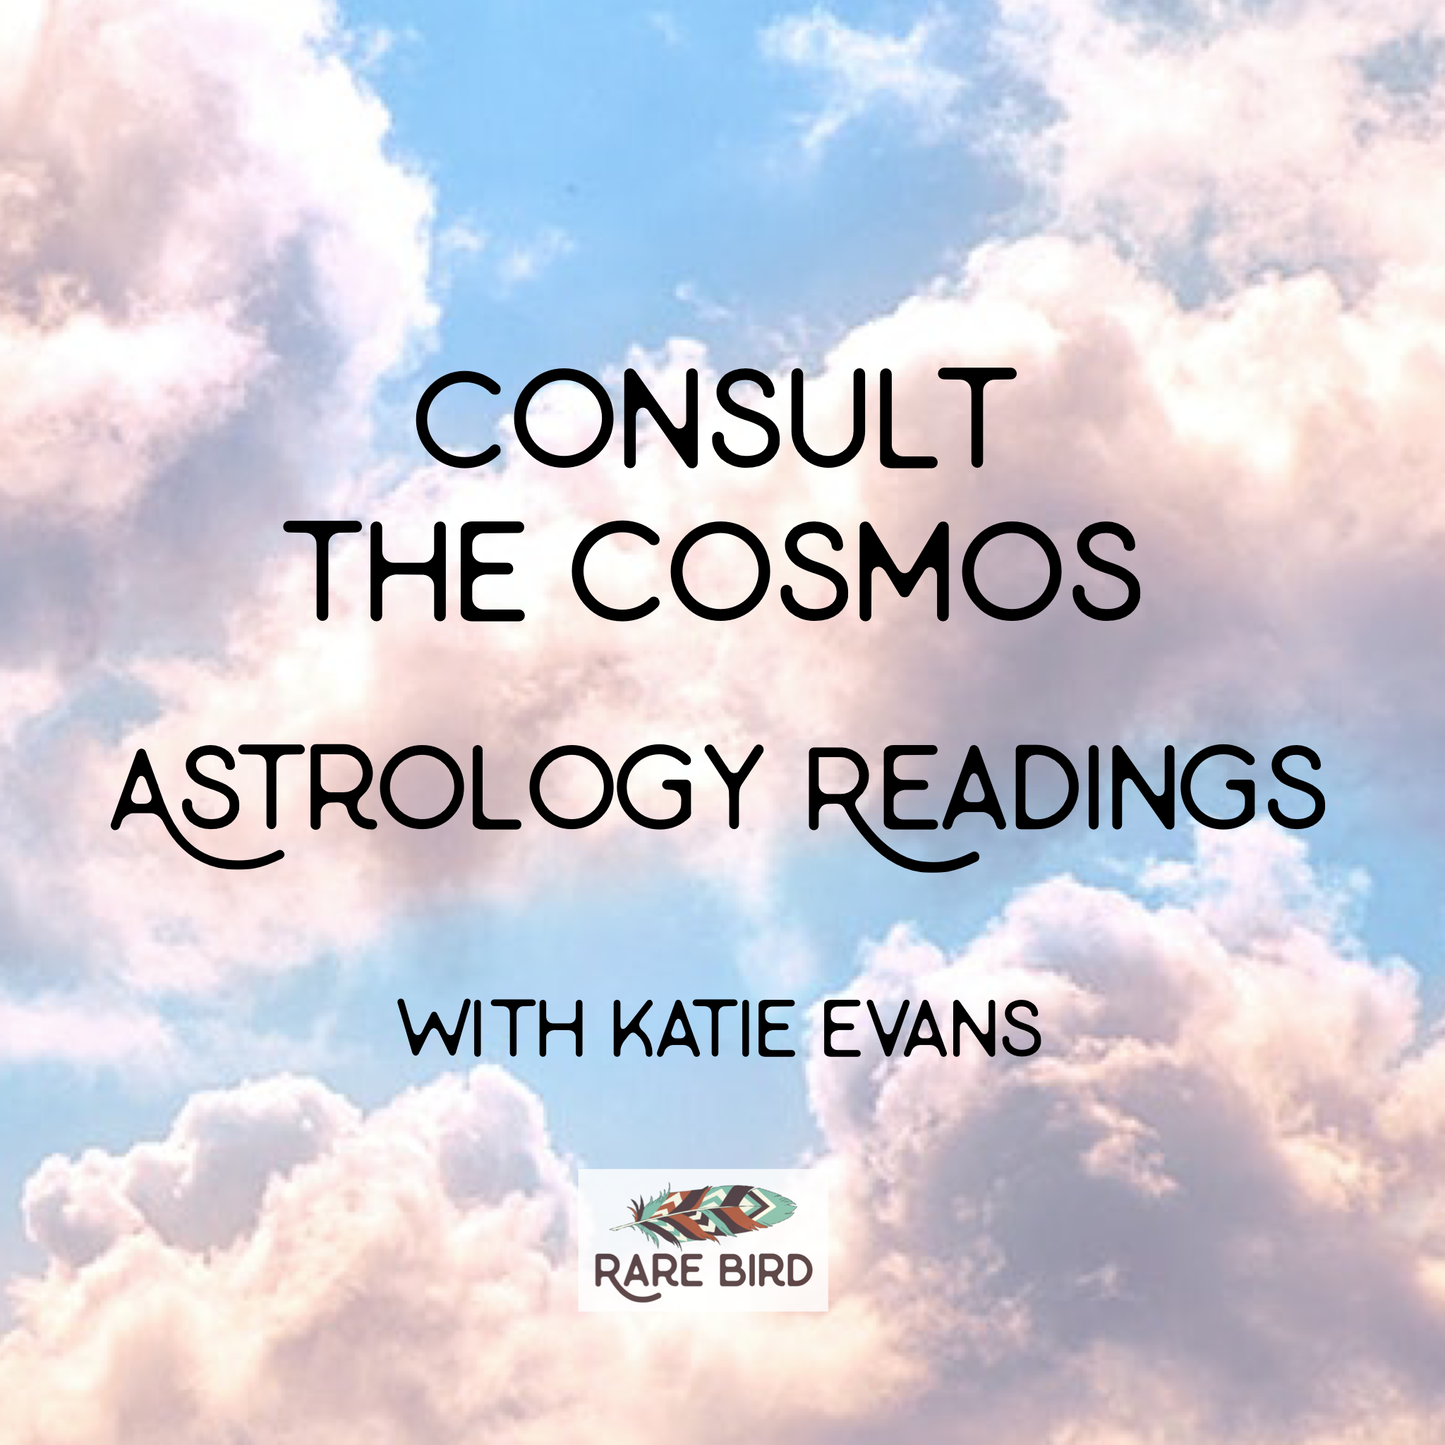 Consult the Cosmos ~ Astrology Readings 4/18